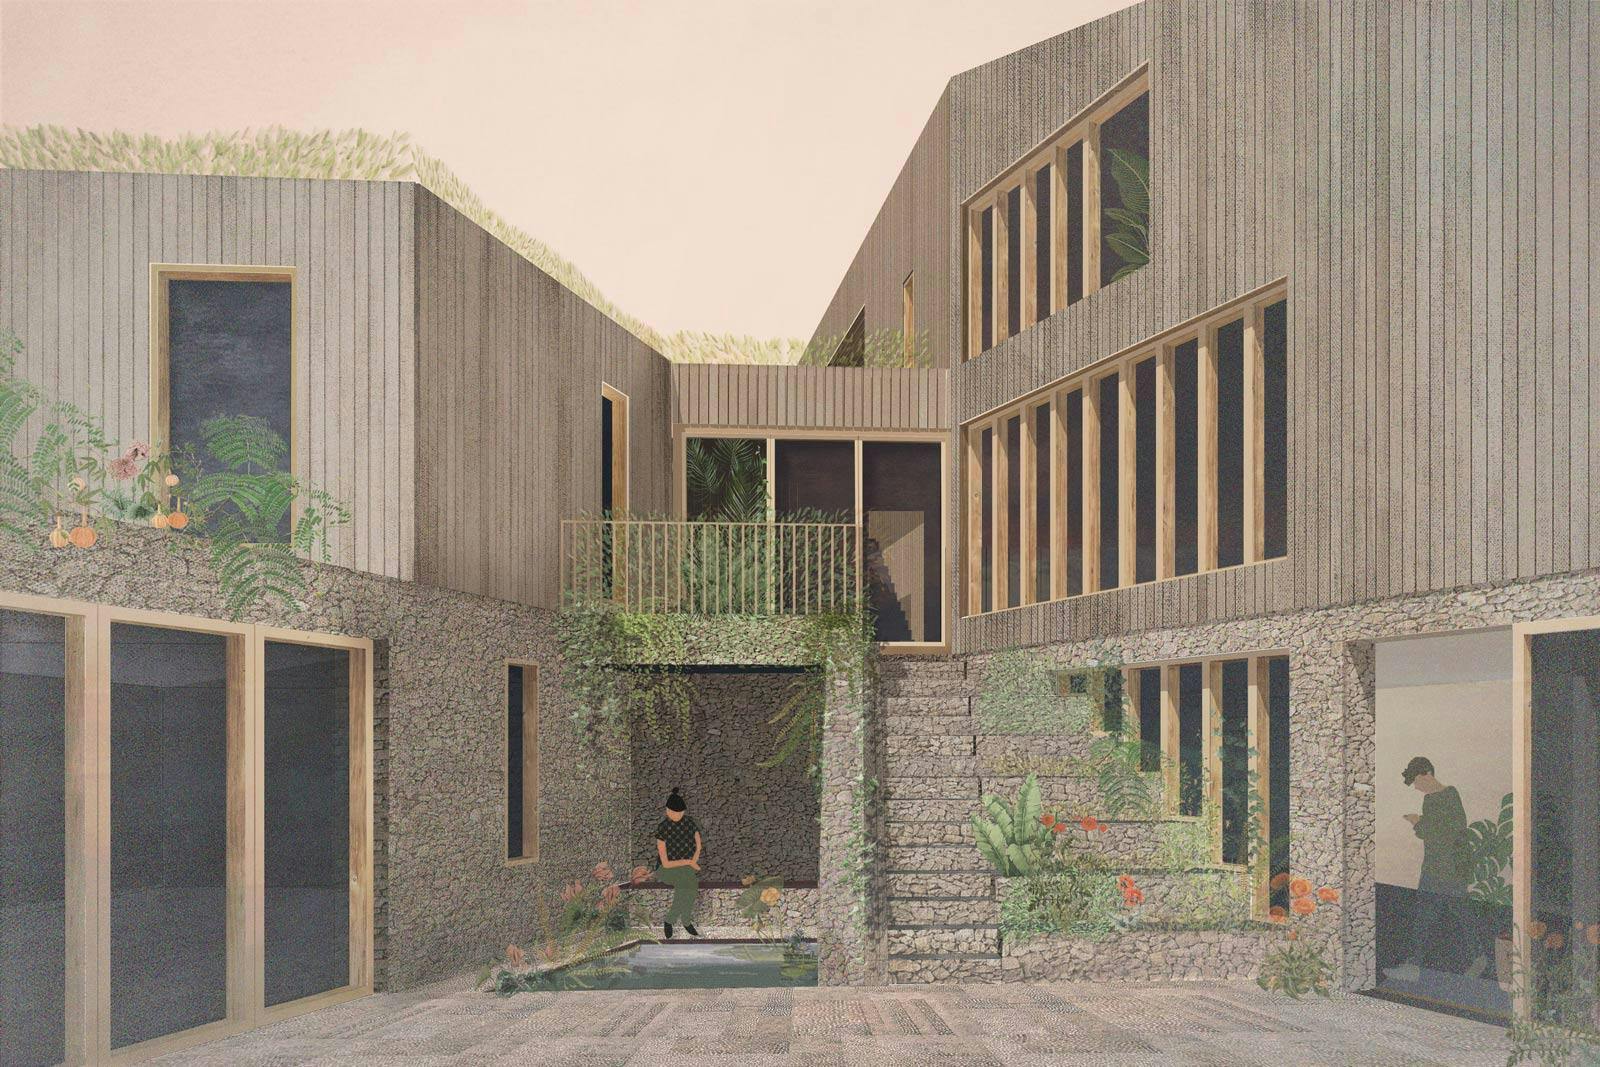 Architectural visualisation of a house with stone and timber cladding